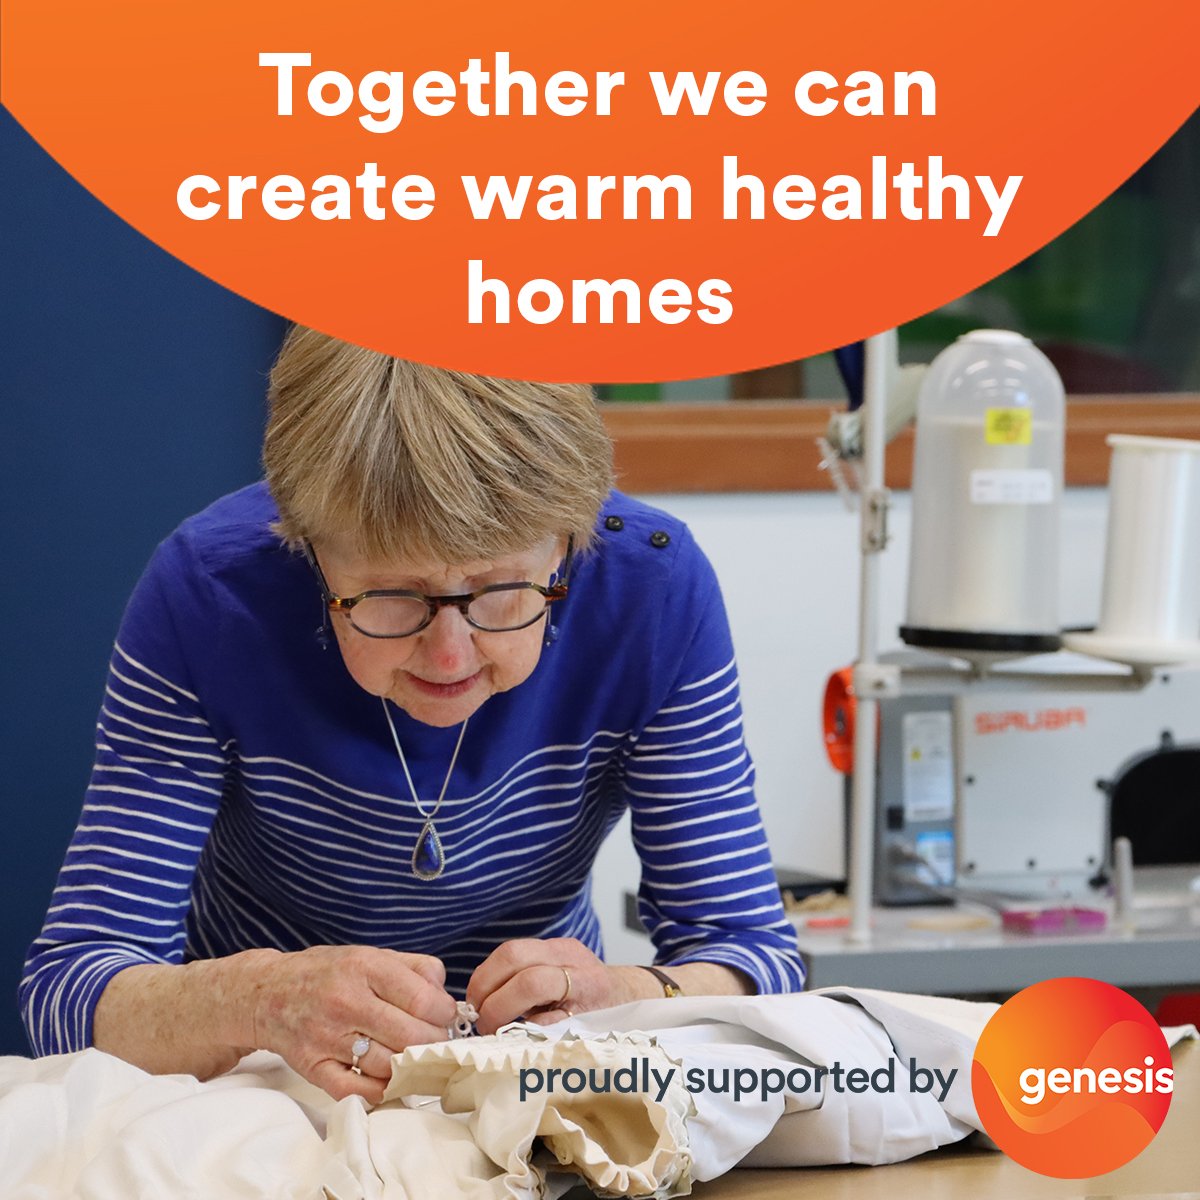 With support from Genesis, we're ensuring that families in need have a warm, healthy home this winter 💖

If you have considered supporting the Wellington Curtain Bank's incredible mission to provide quality curtains to households in need - now is th